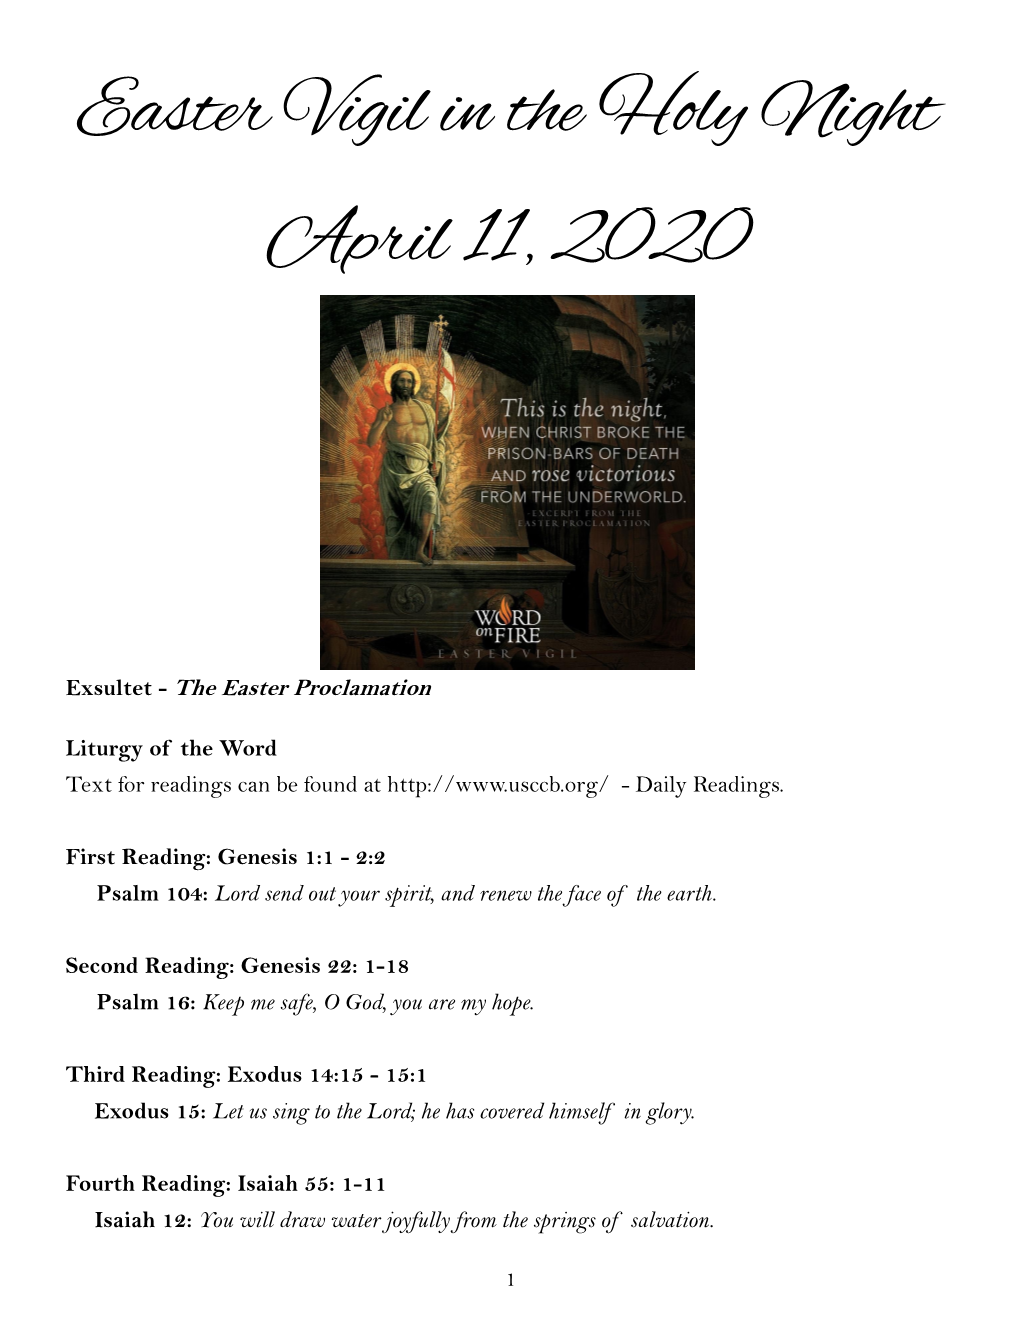 Easter Vigil in the Holy Night April 11, 2020